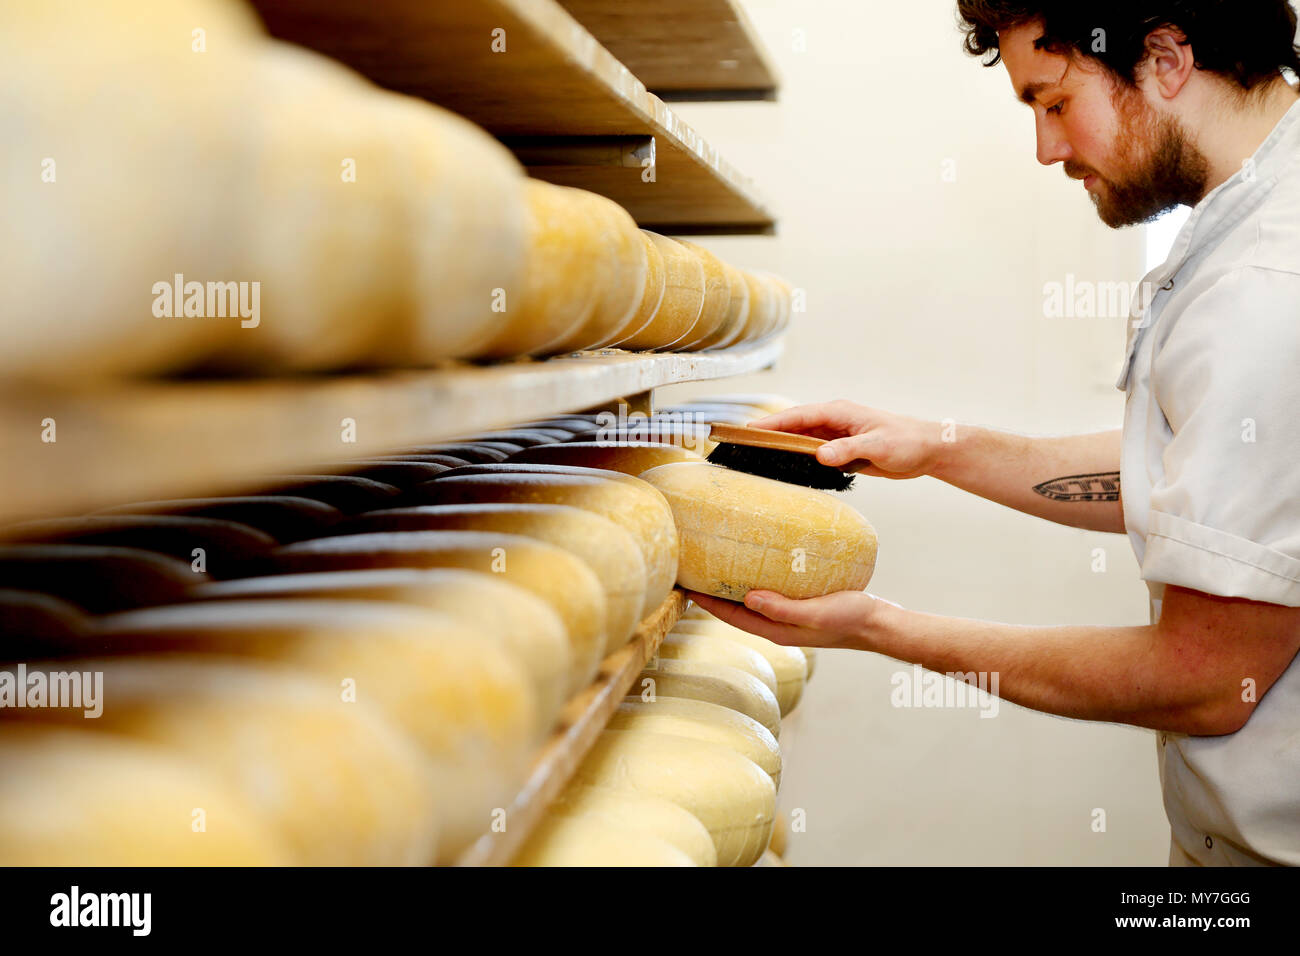 Cheese maker brushing mould off the hard cheeses by hand Stock Photo